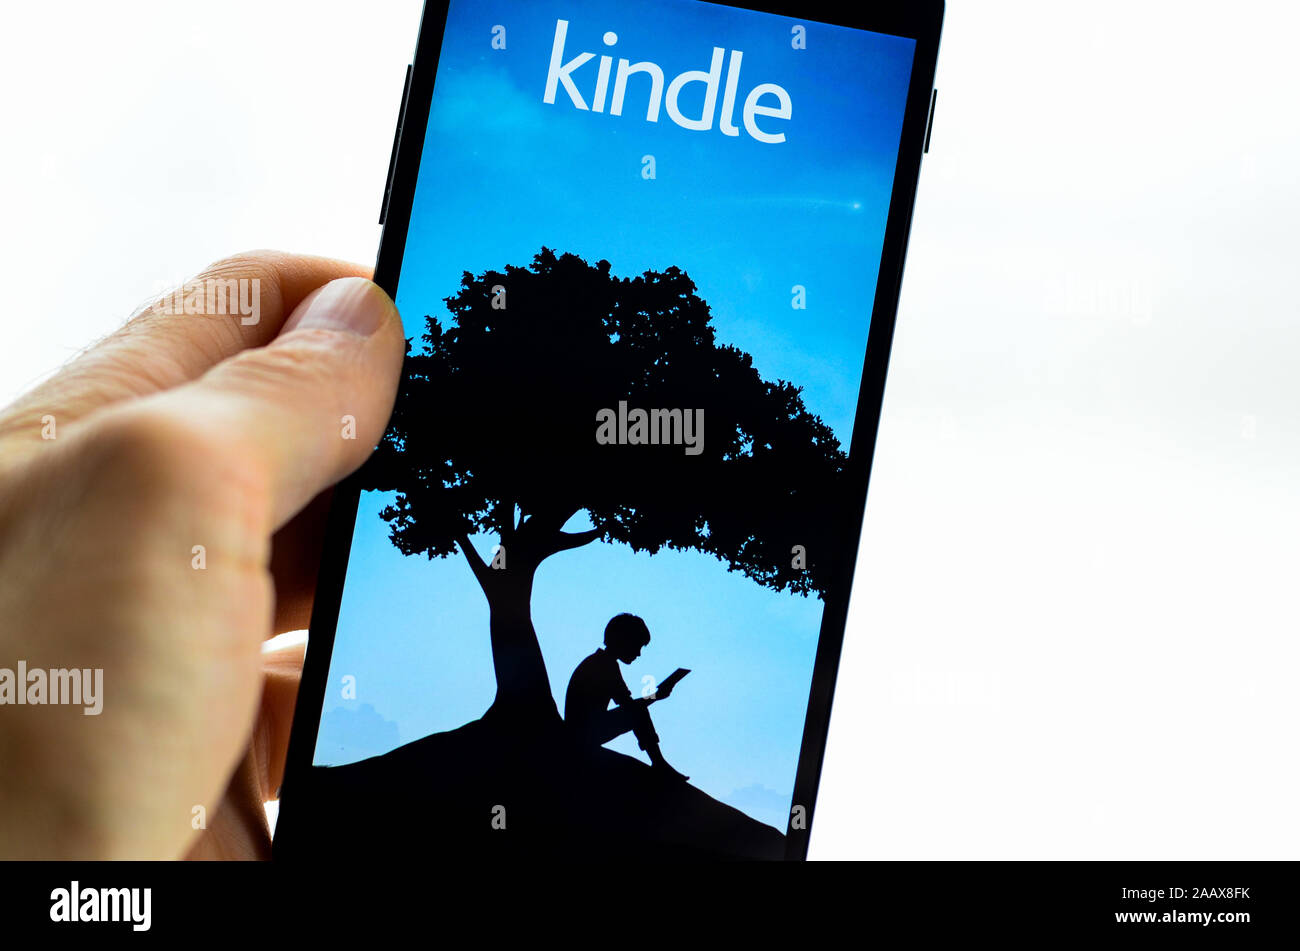 A smartphone with the Kindle app on it. Stock Photo